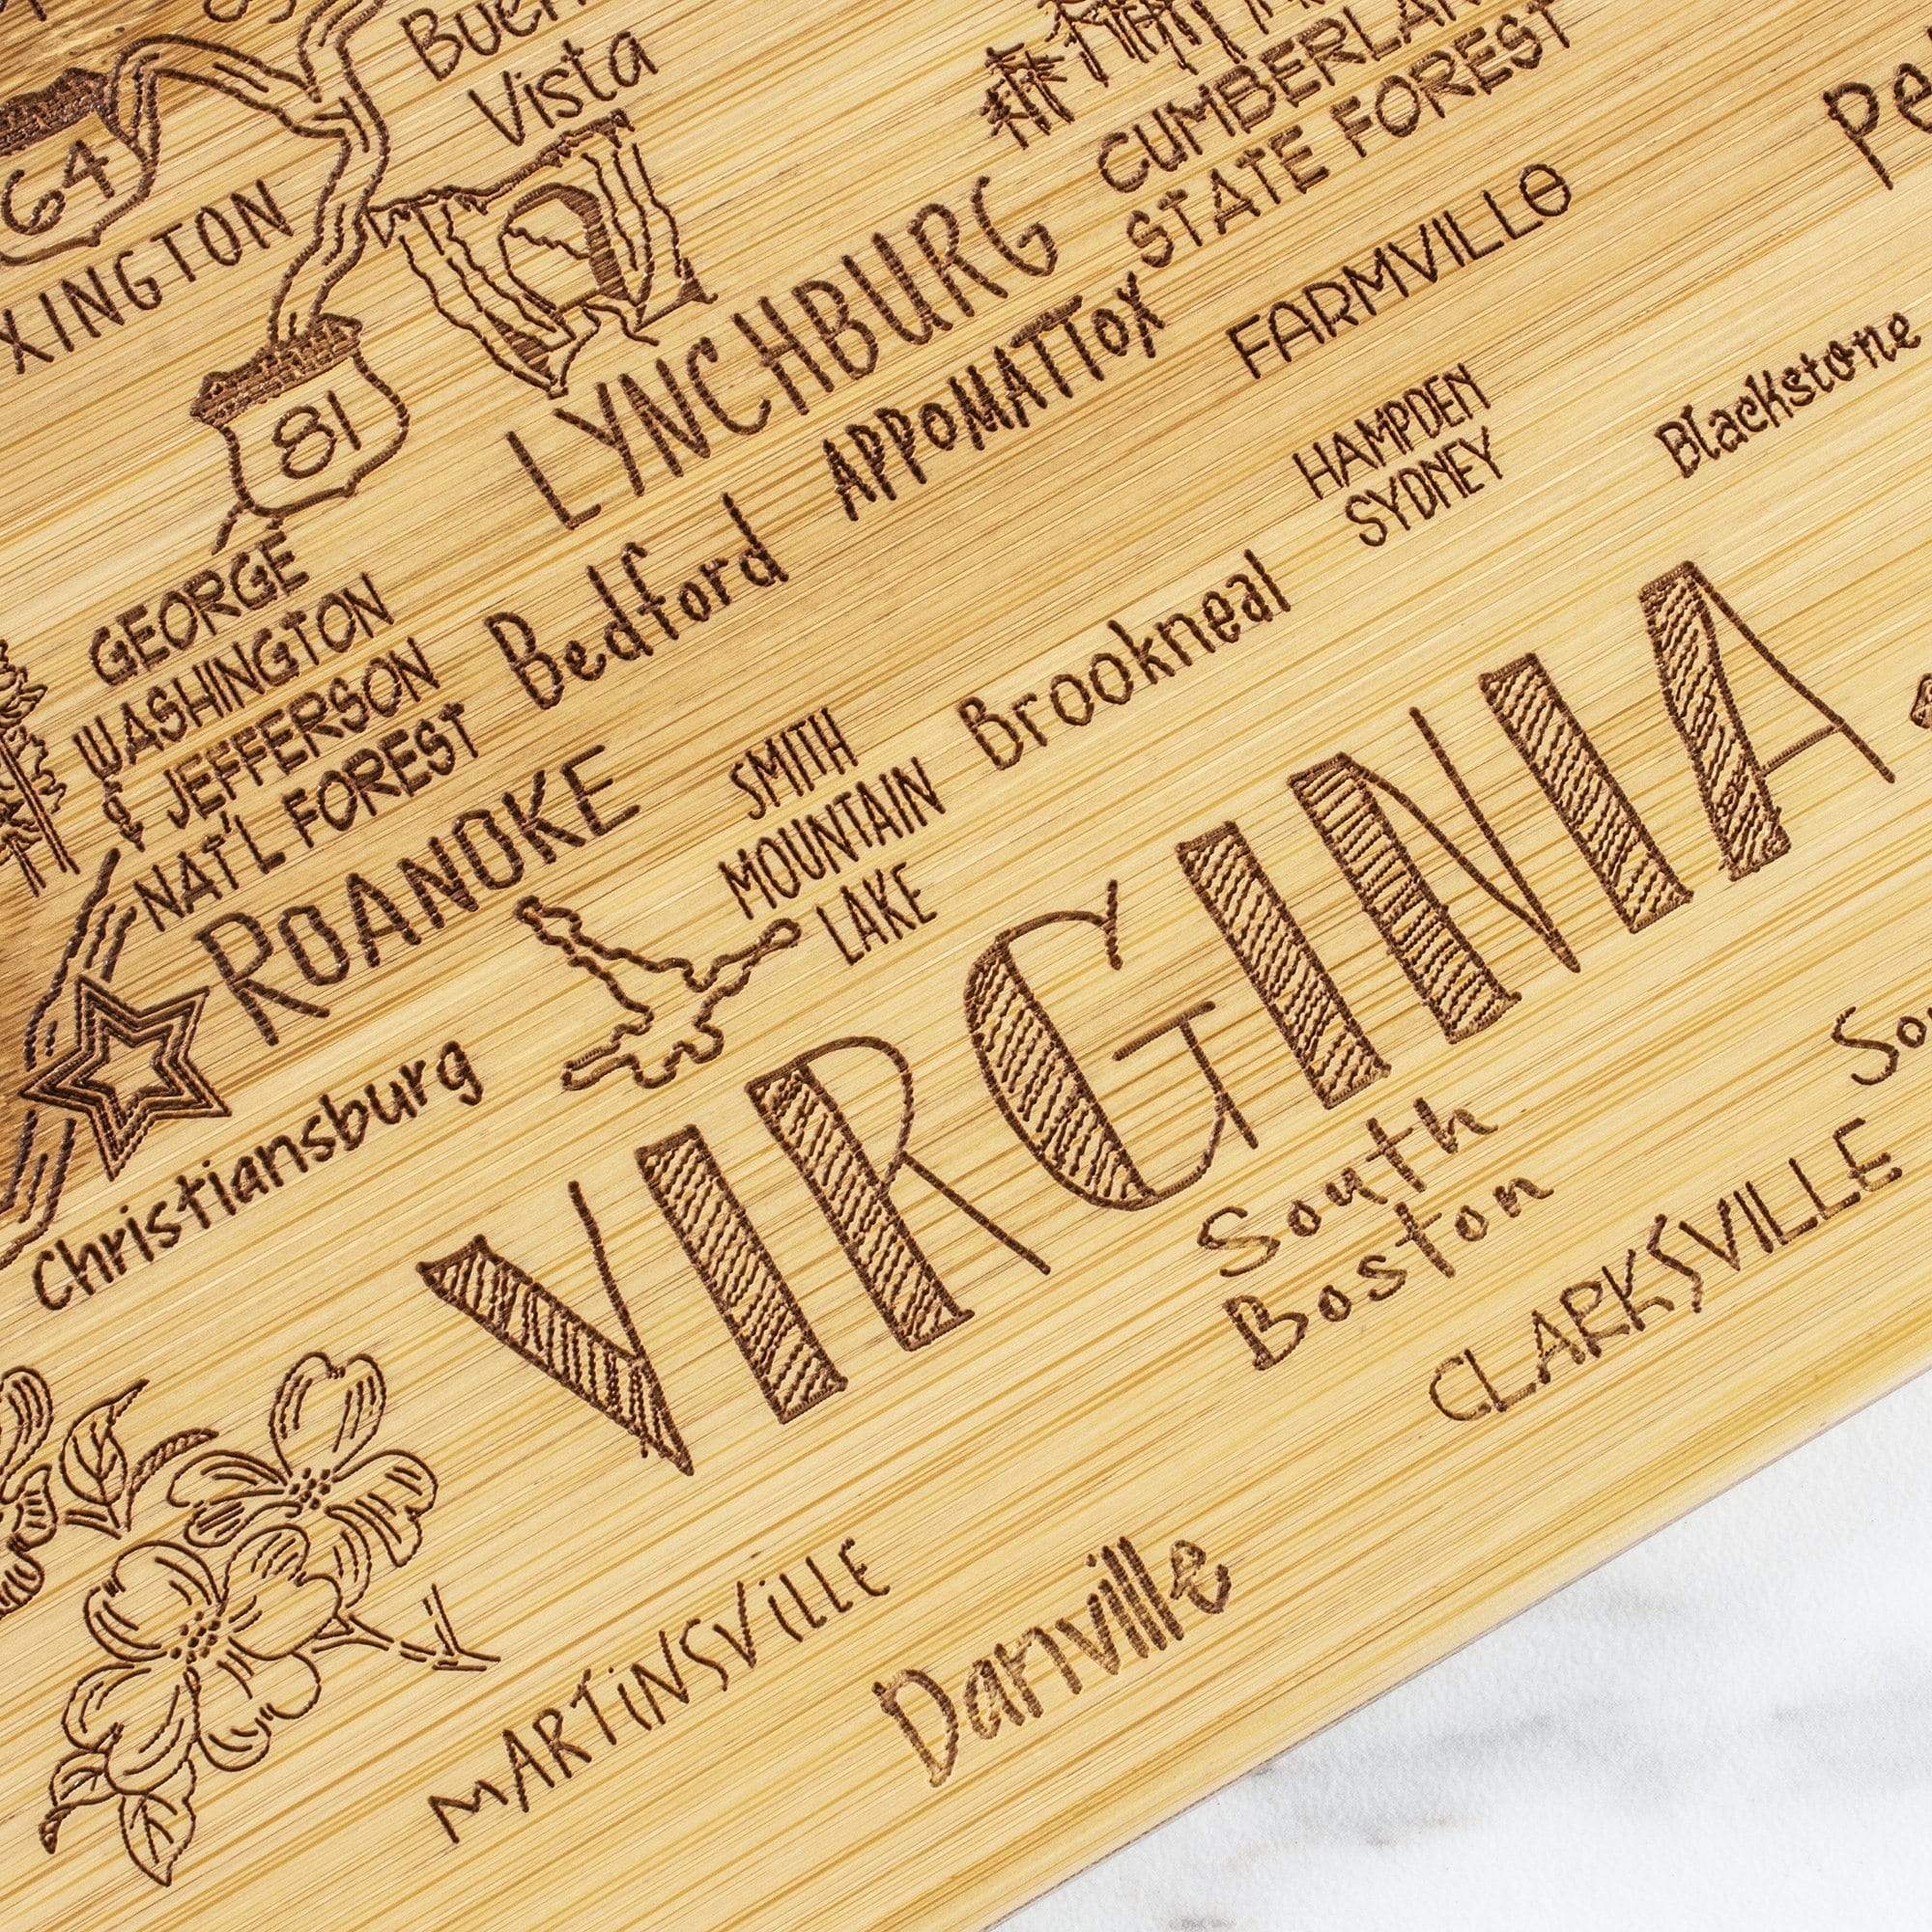 US State Shaped Bamboo Cutting Boards with Engraved Text